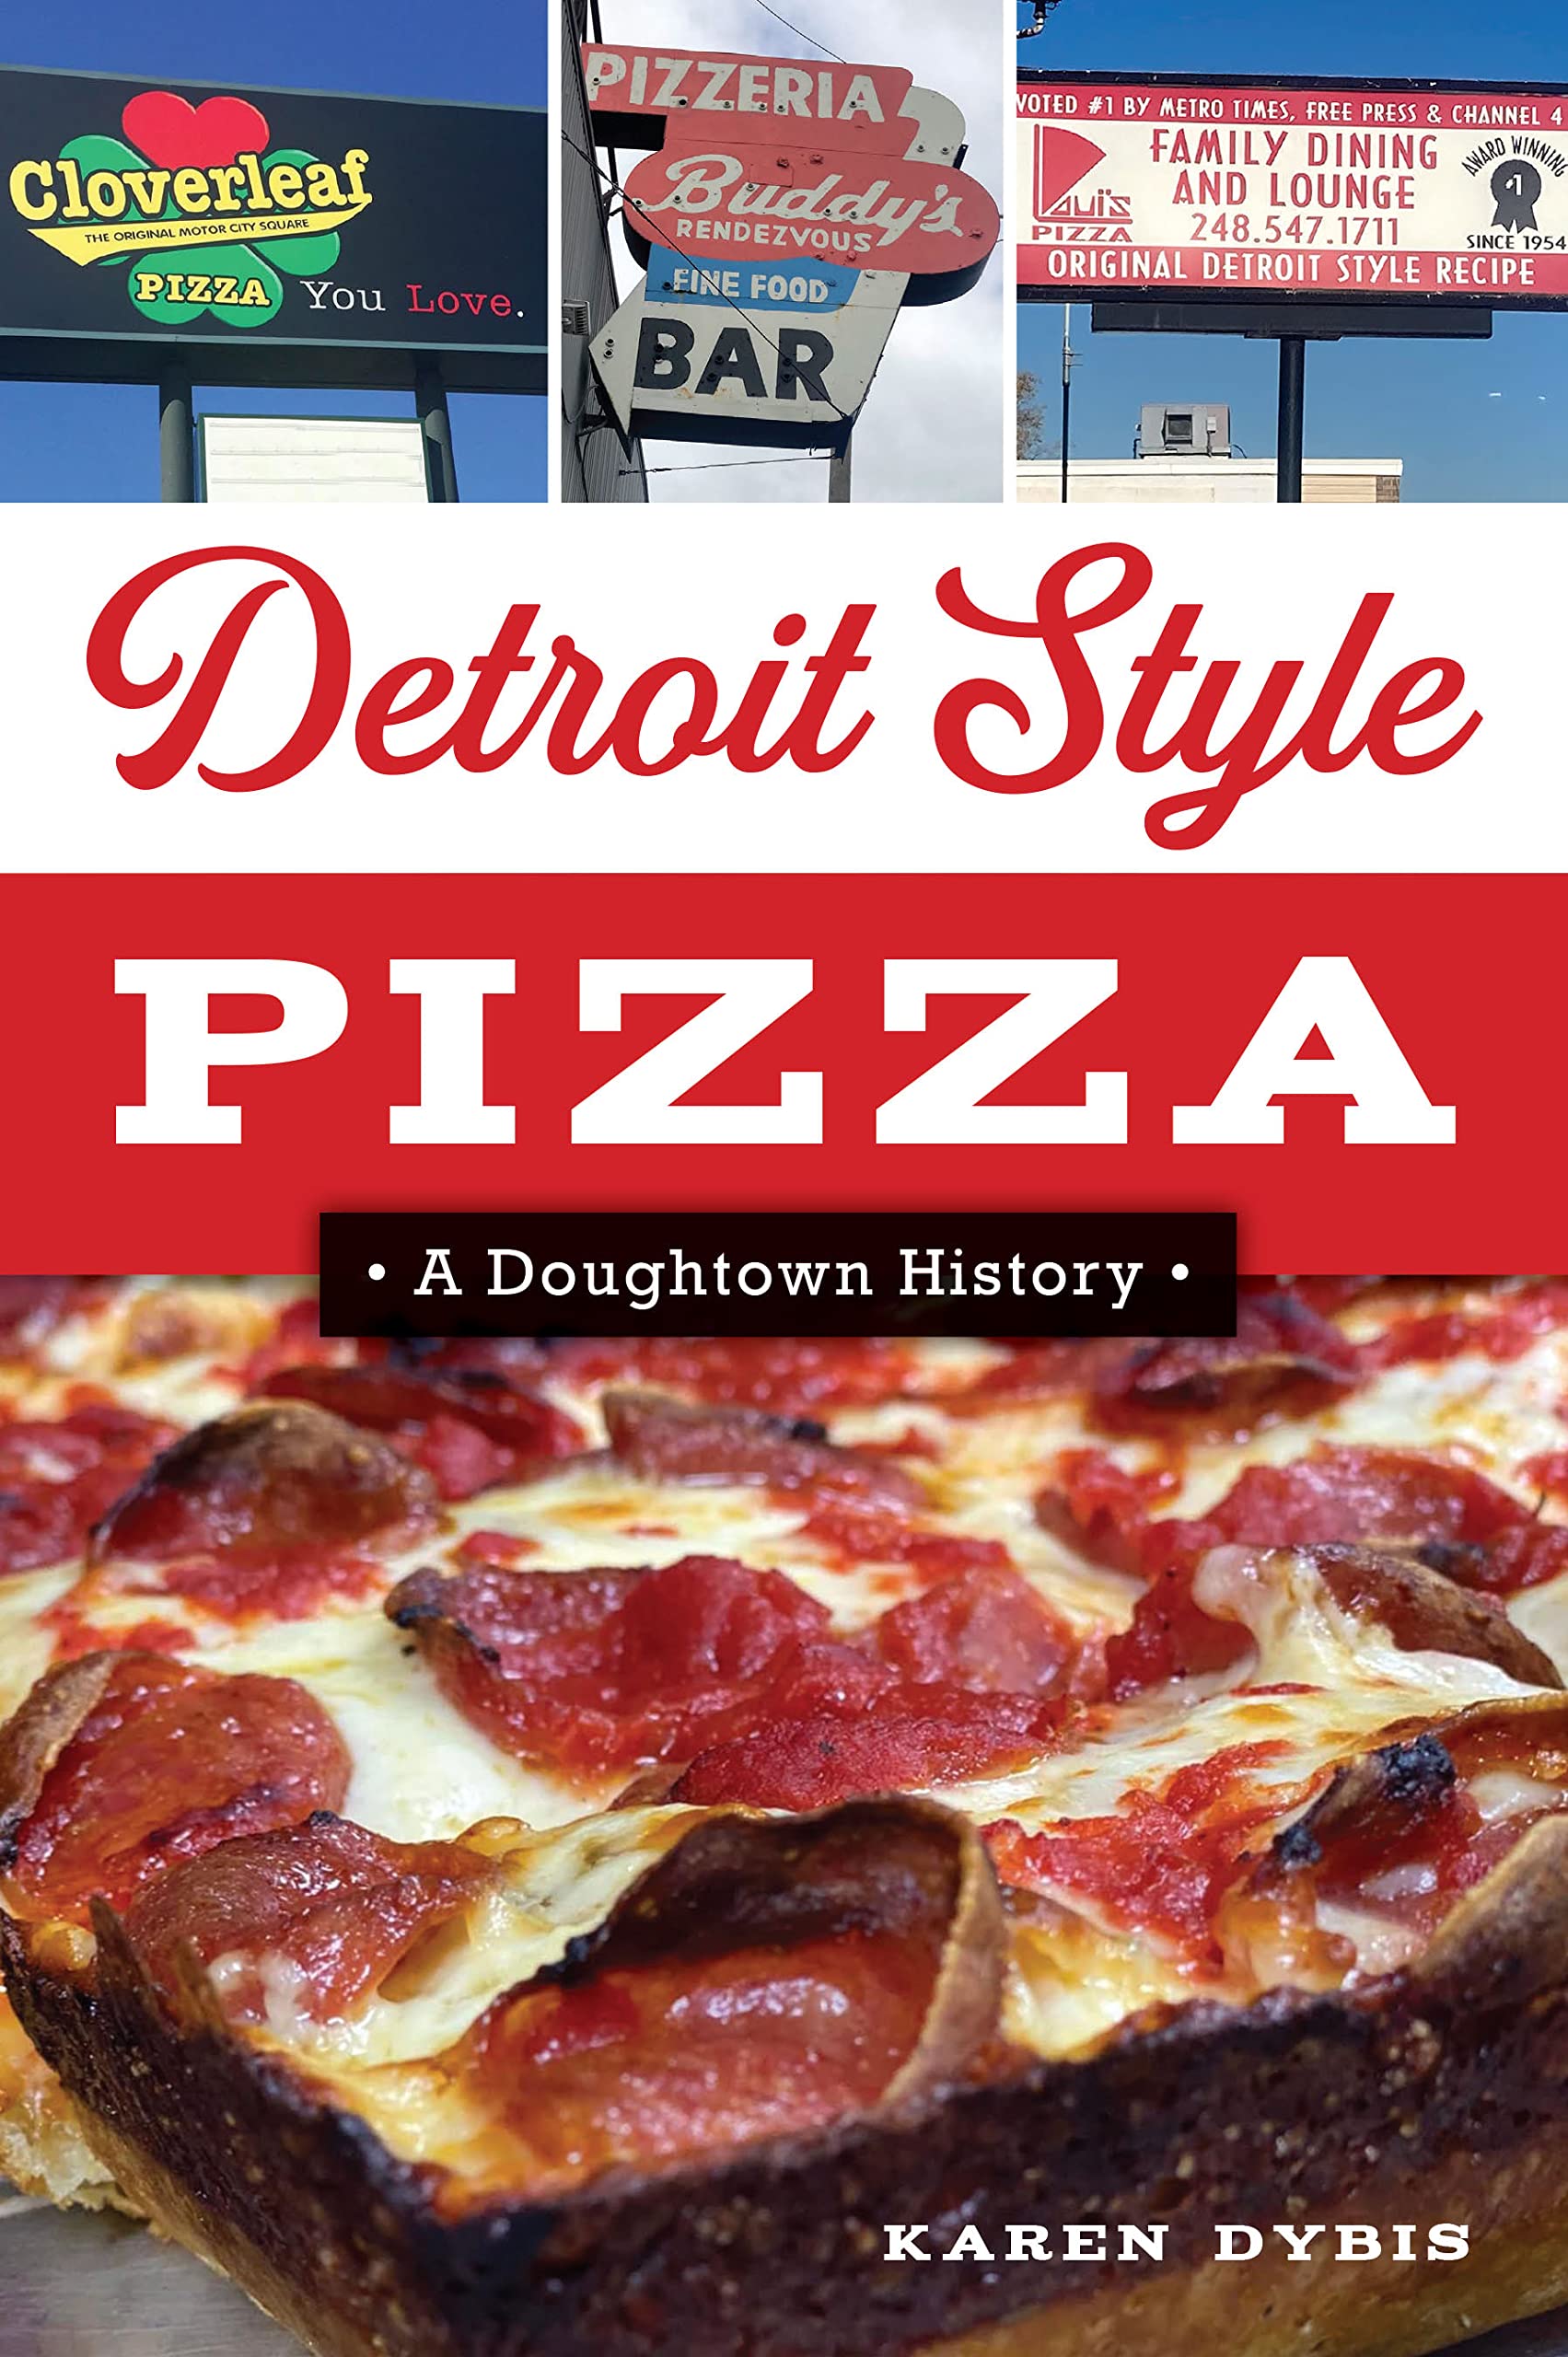 Book jacket of Detroit Style Pizza: A Doughtown History featuring a slice of Detroit style pizza in foreground